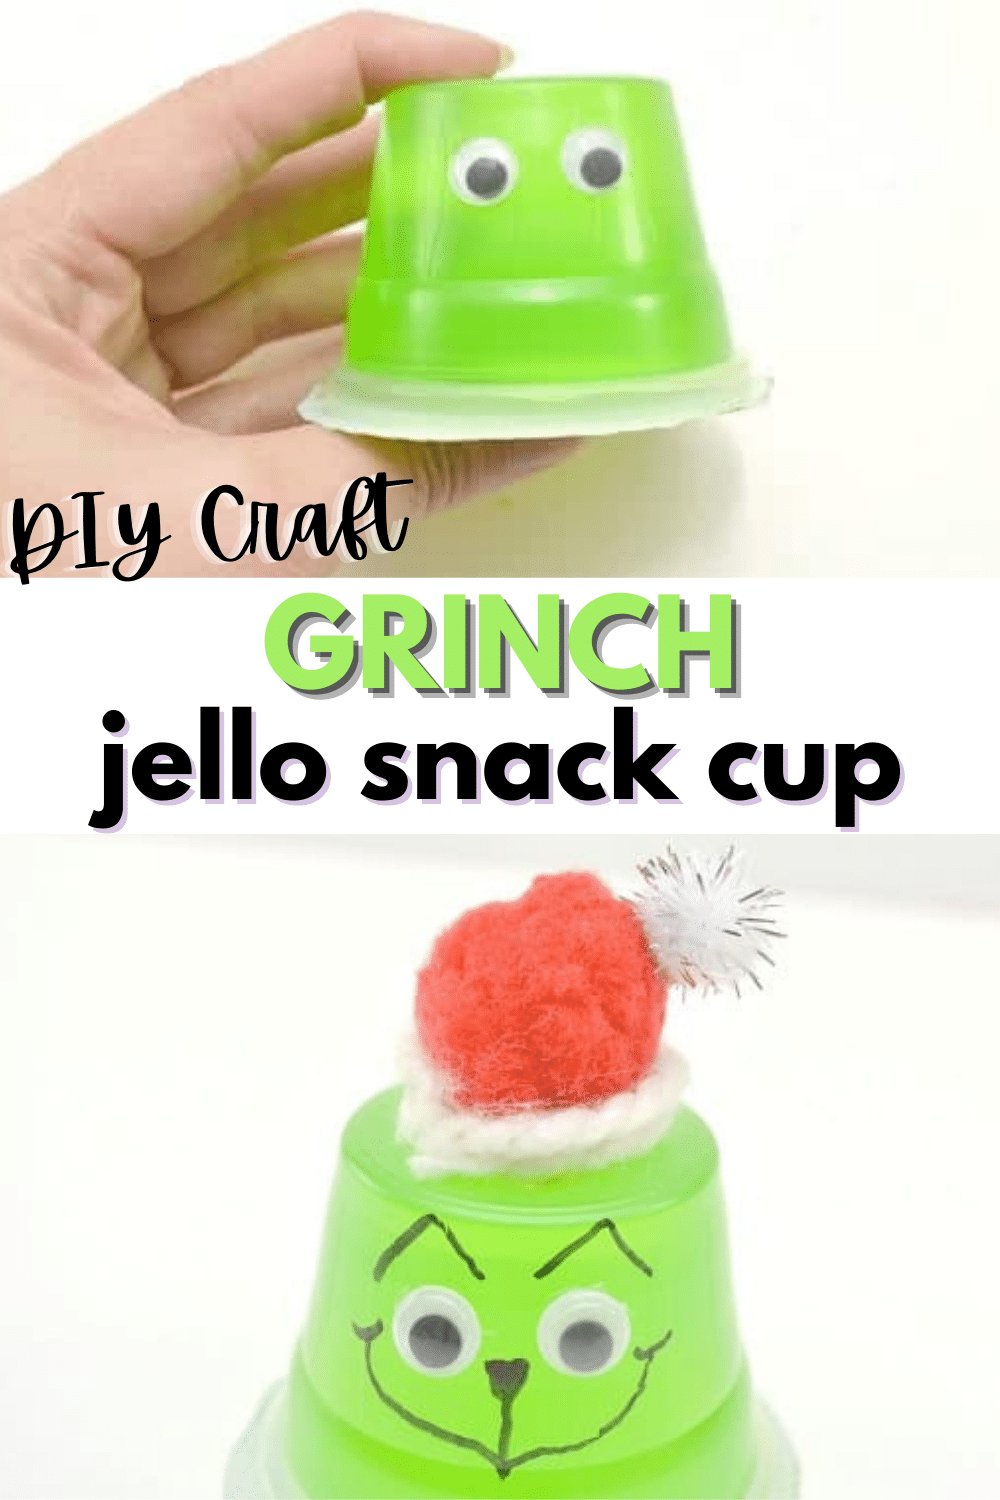 Grinch-themed jello snack cup.